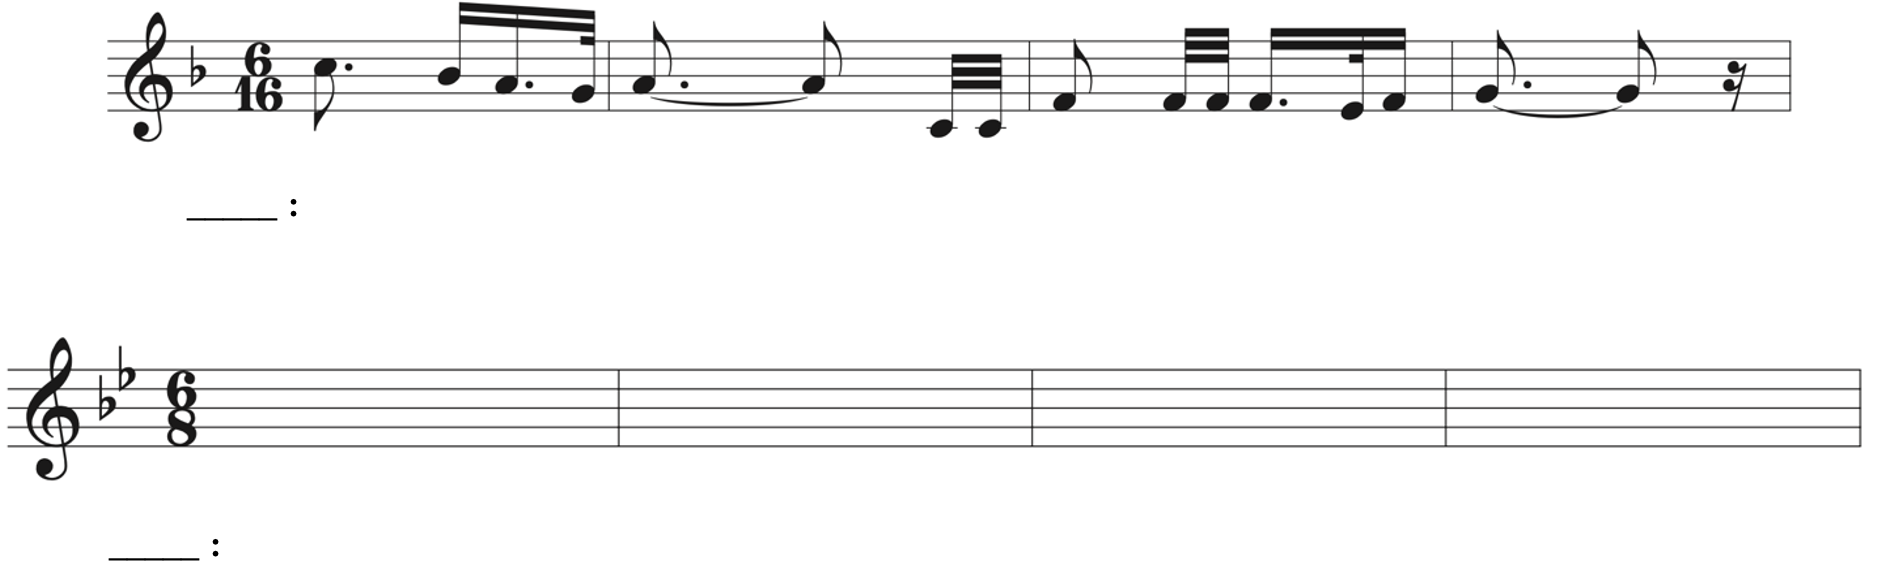 Melody is "Home on the Range." Transpose from key with one flat to key with two flats and from the time signature 6-16 to the time signature 6-8.